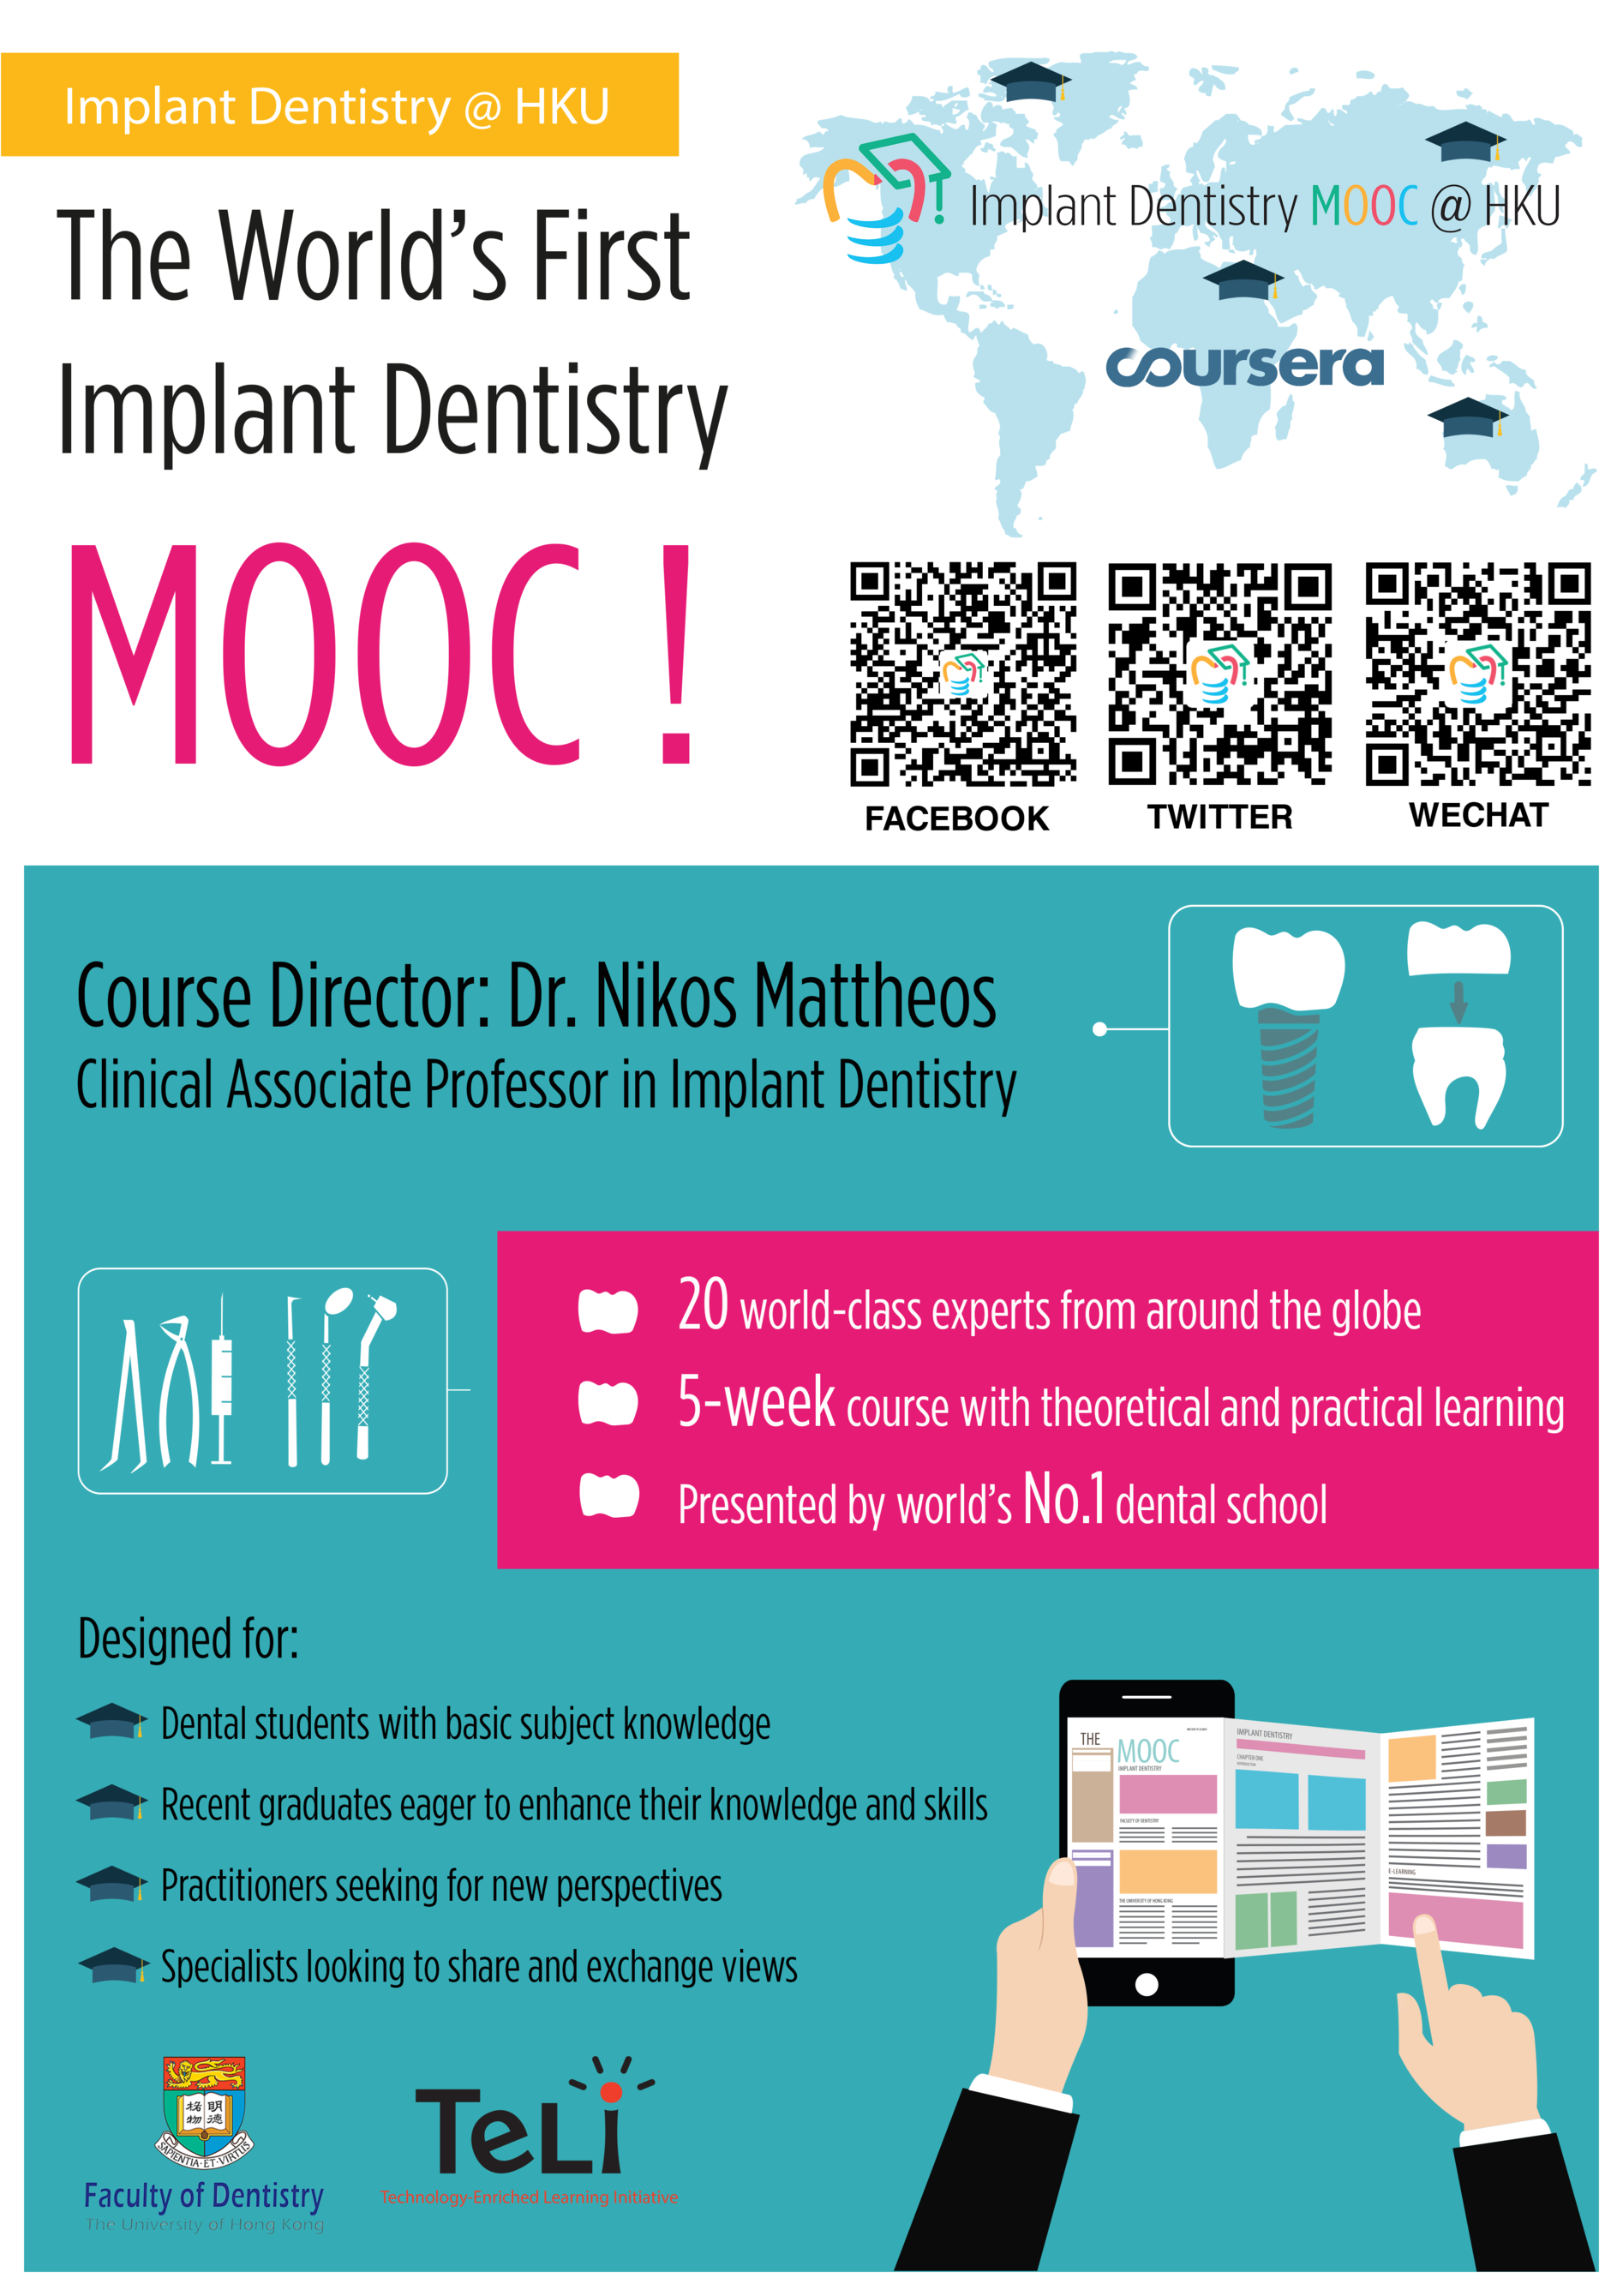 First Implant Dentistry MOOC!